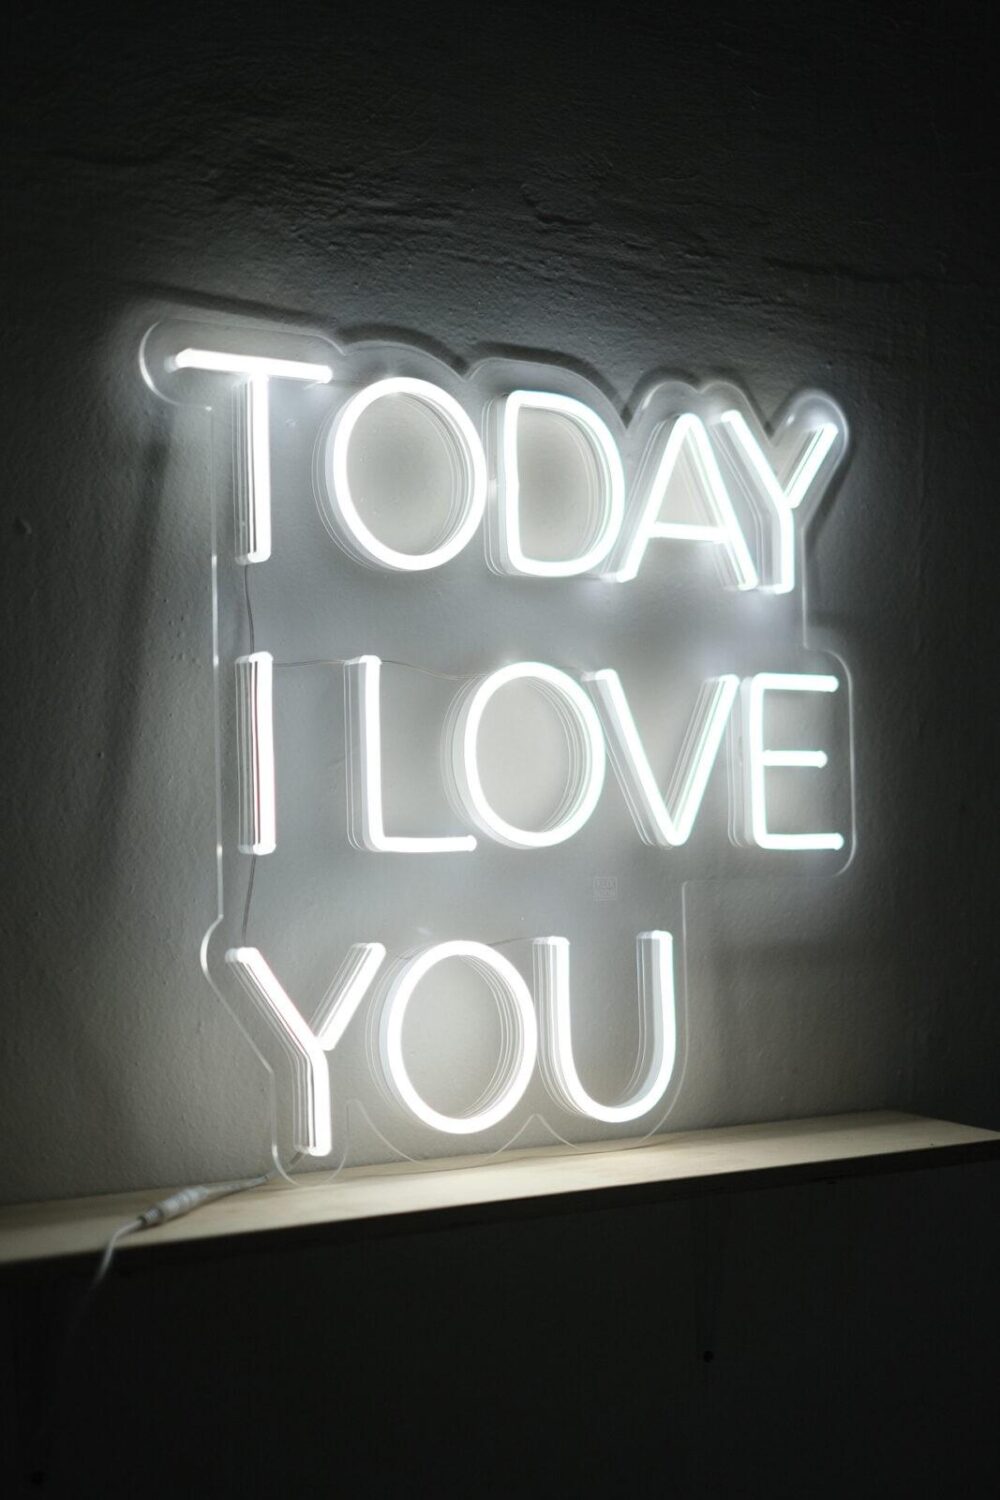 Today i love you